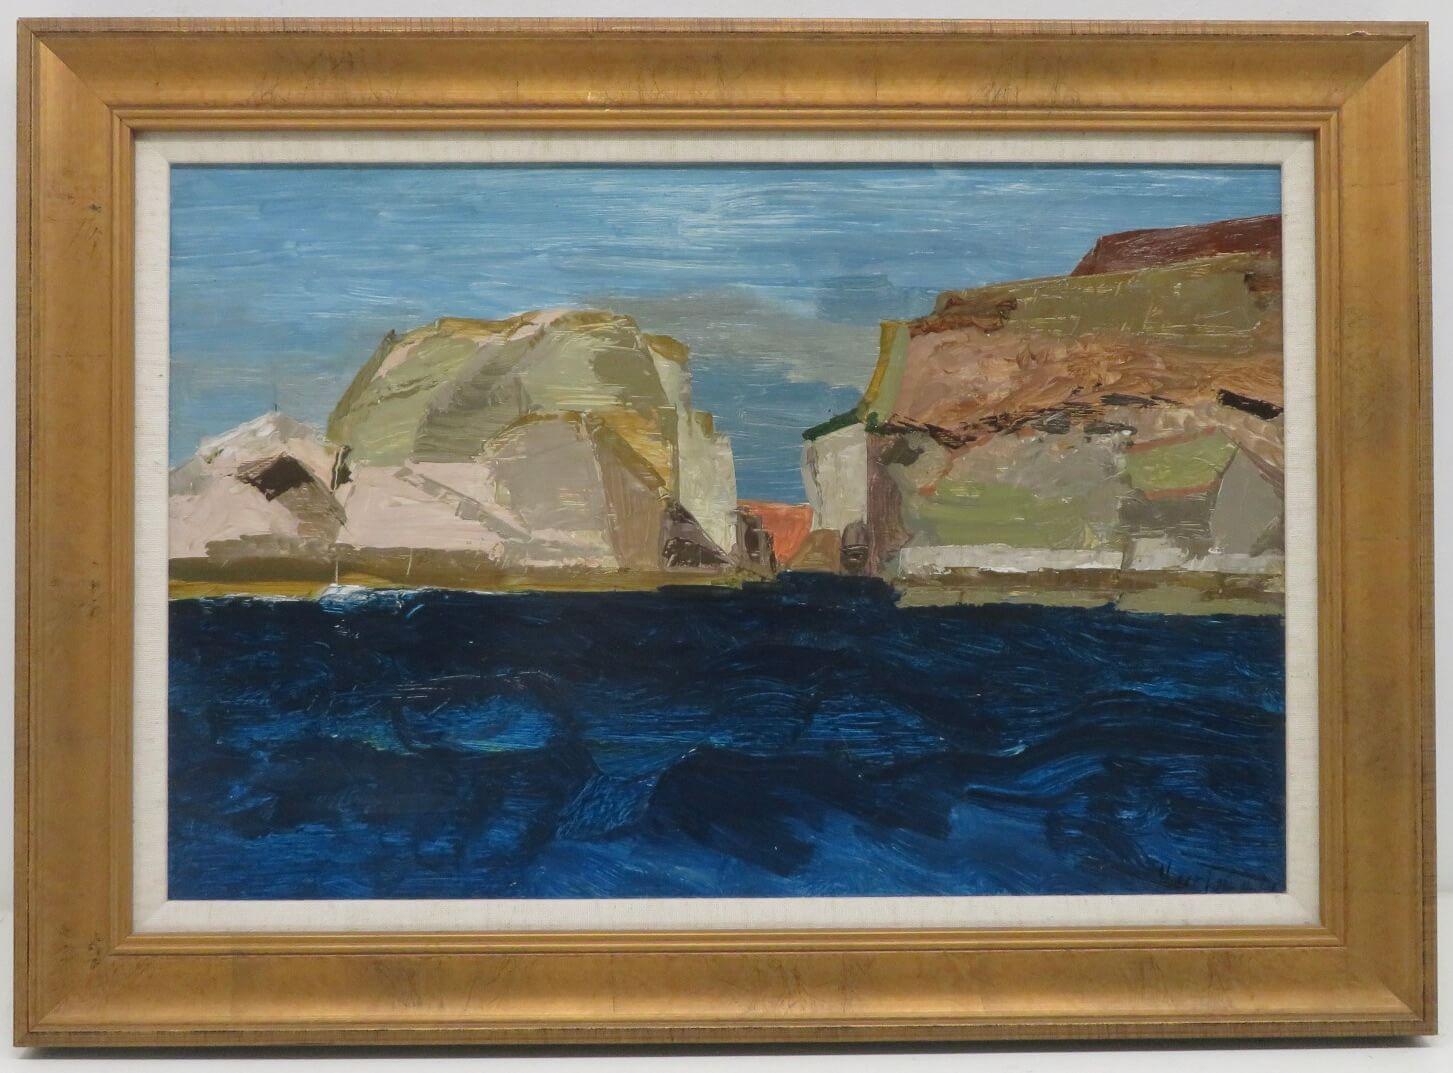 ARTIST: Michael Pullee NEAC (1936-2021) British 
TITLE:  "Burgh Island Devon"
SIGNED: lower right 
MEDIUM: oil on board
SIZE: 55cm x 40cm inc frame 
CONDITION: excellent 
DETAIL: He was elected a member of the New English Art Club in 1978, following